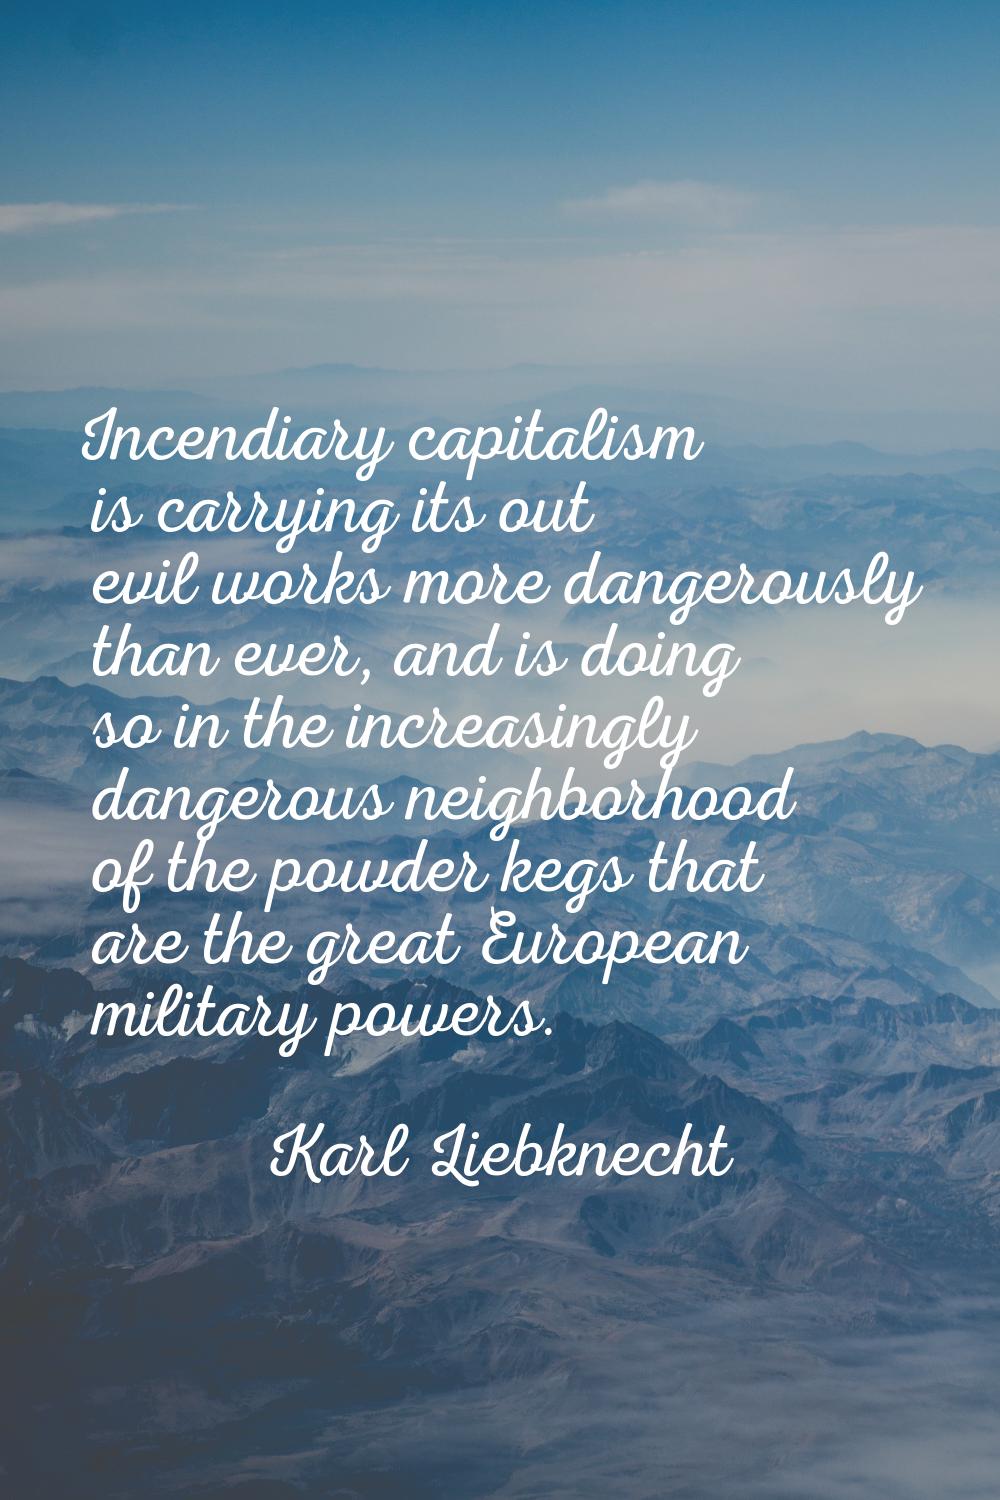 Incendiary capitalism is carrying its out evil works more dangerously than ever, and is doing so in